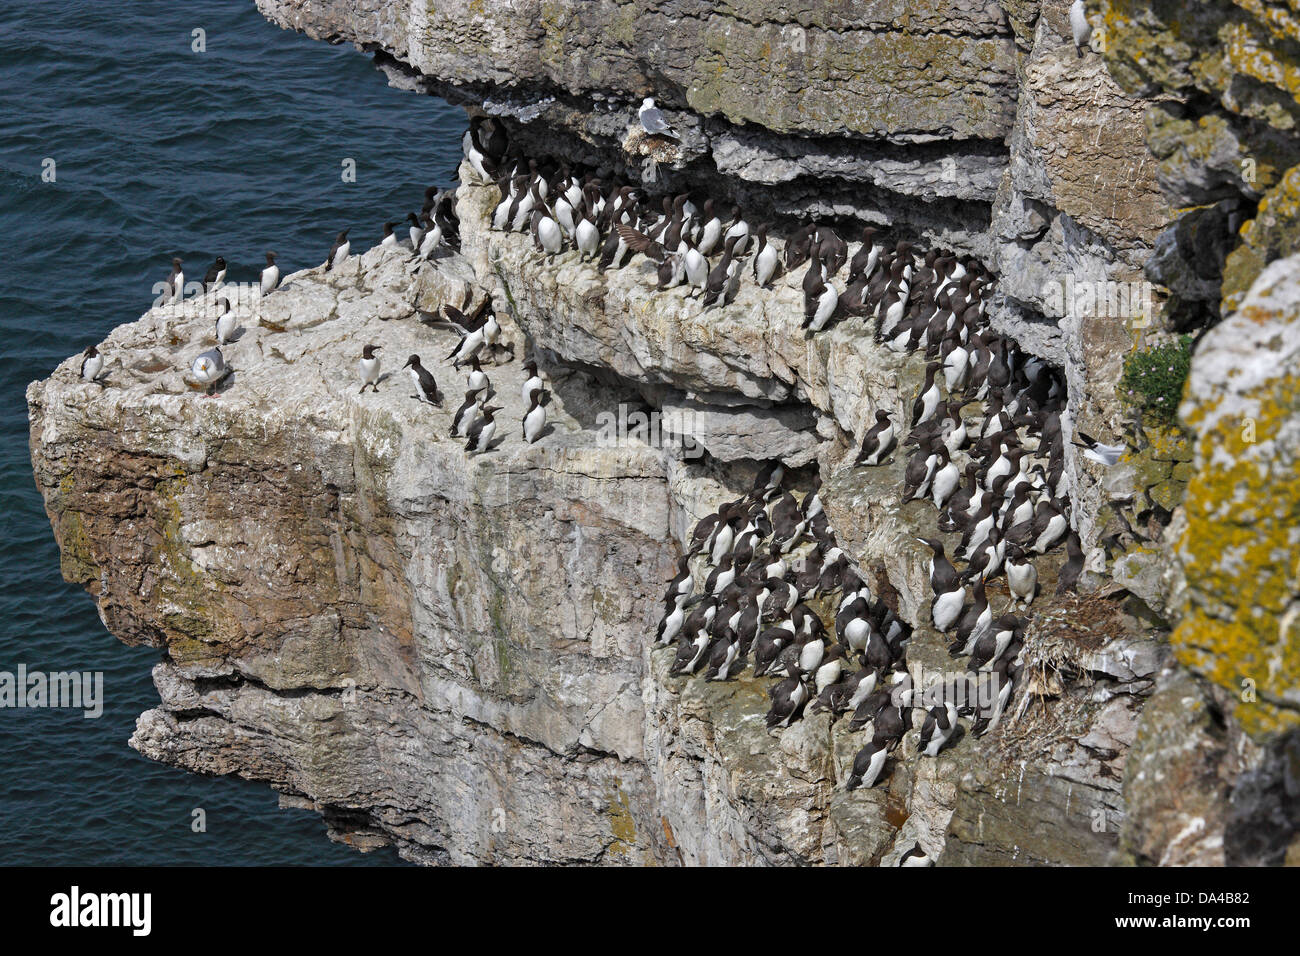 Guillemots (Uria aalge) packed together on cliff Puffin Island North Wales UK June 3399 Stock Photo